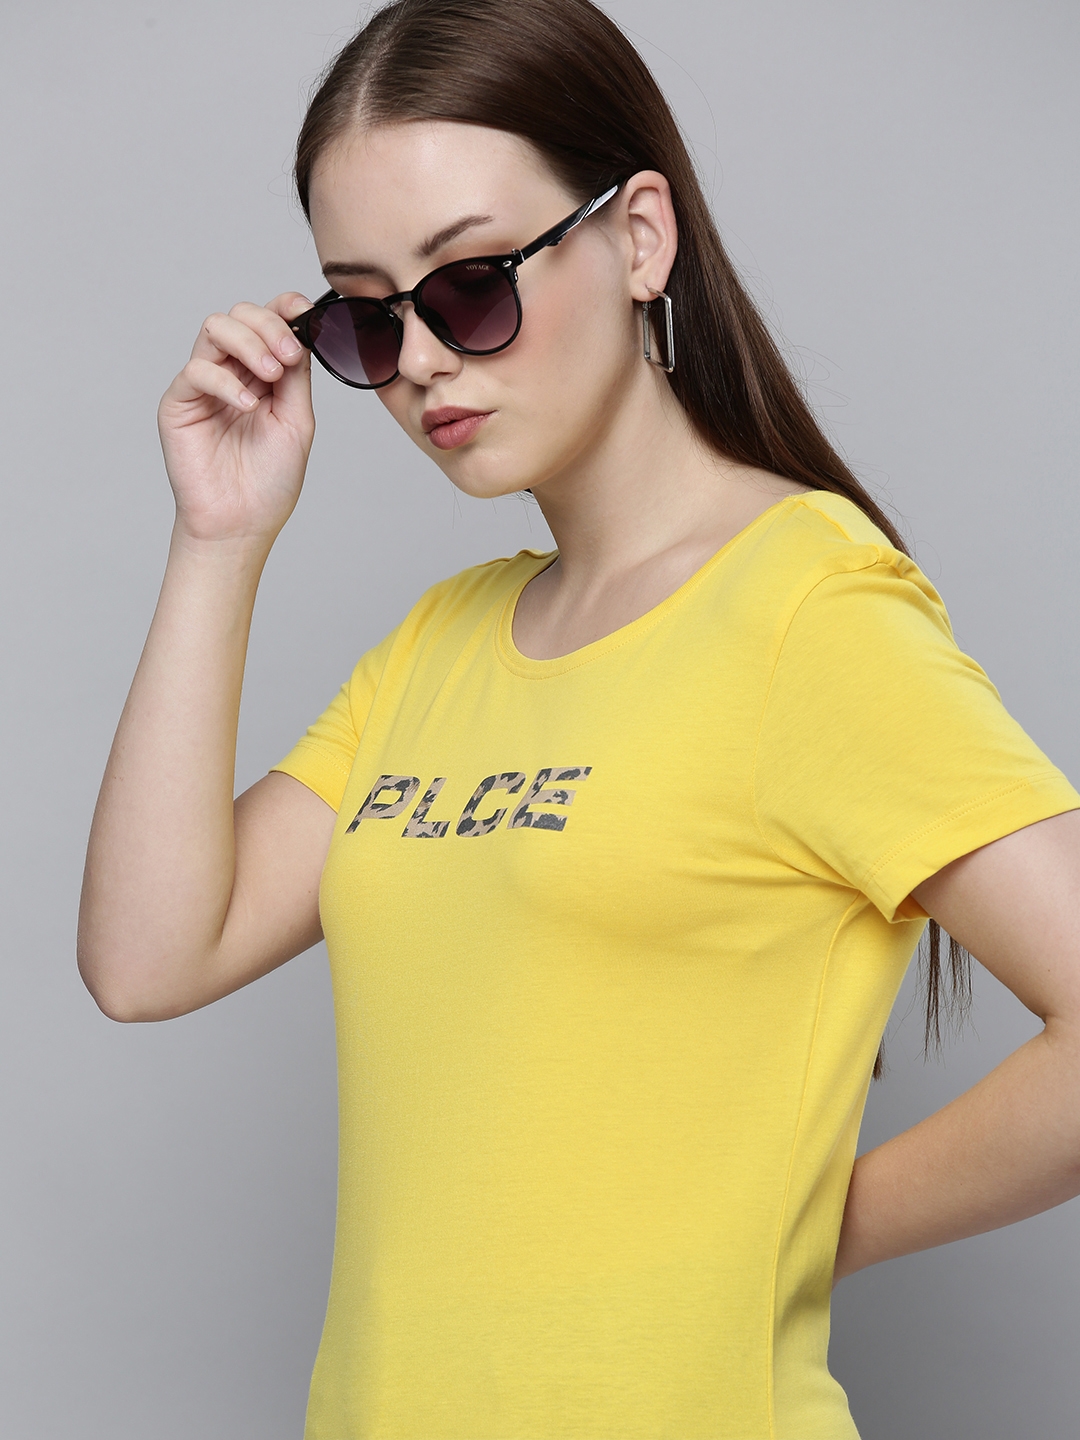 883 Police | 883 Police Womens Yellow Round Neck T-shirt